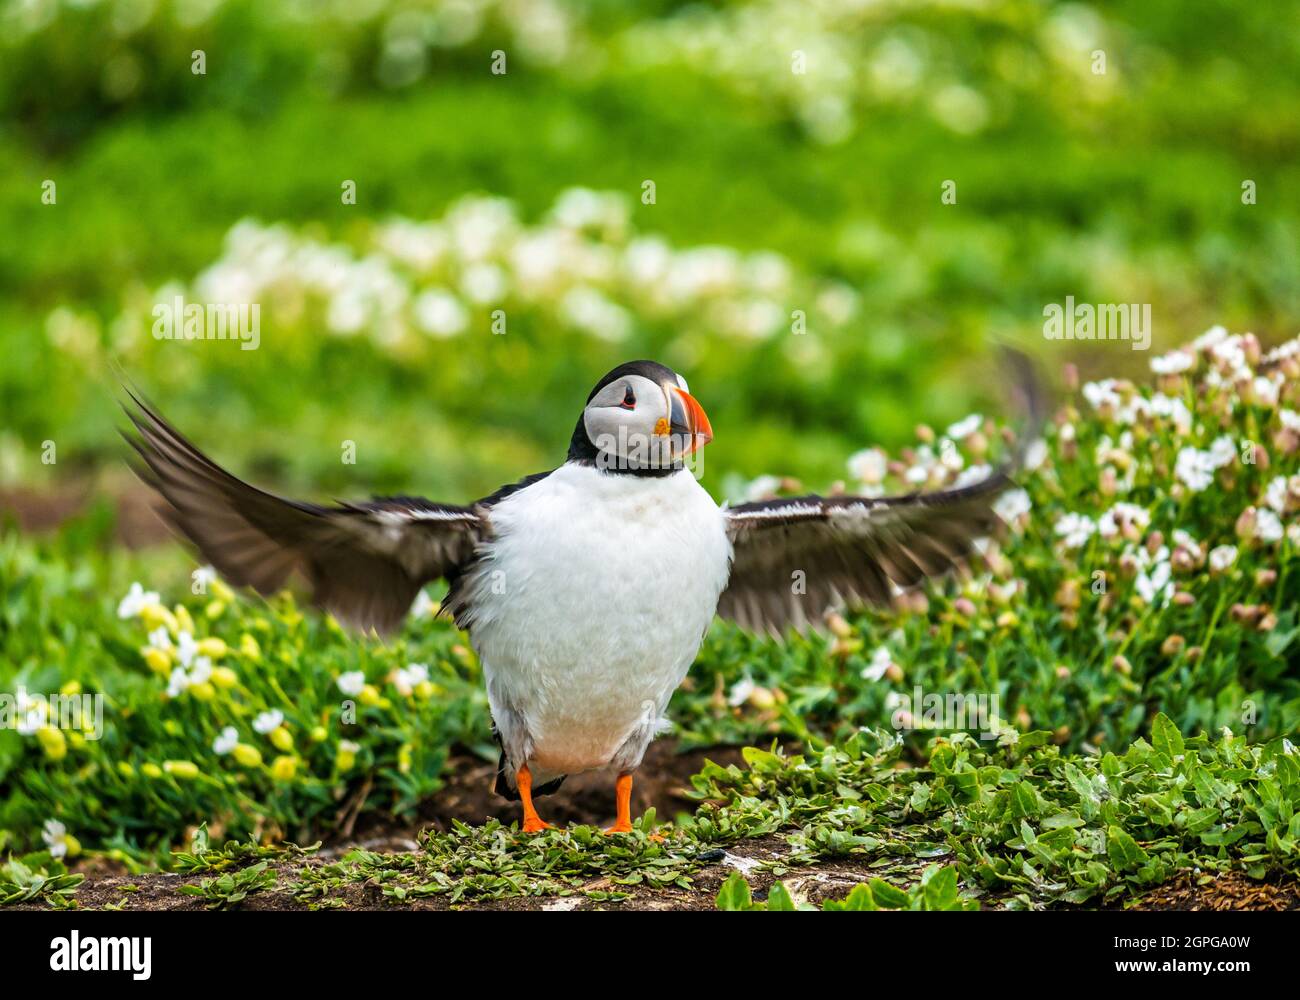 Puffin, Fratercula arctica, with outstretched flapping wings, Isle of May seabird nature reserve, Scotland, UK Stock Photo